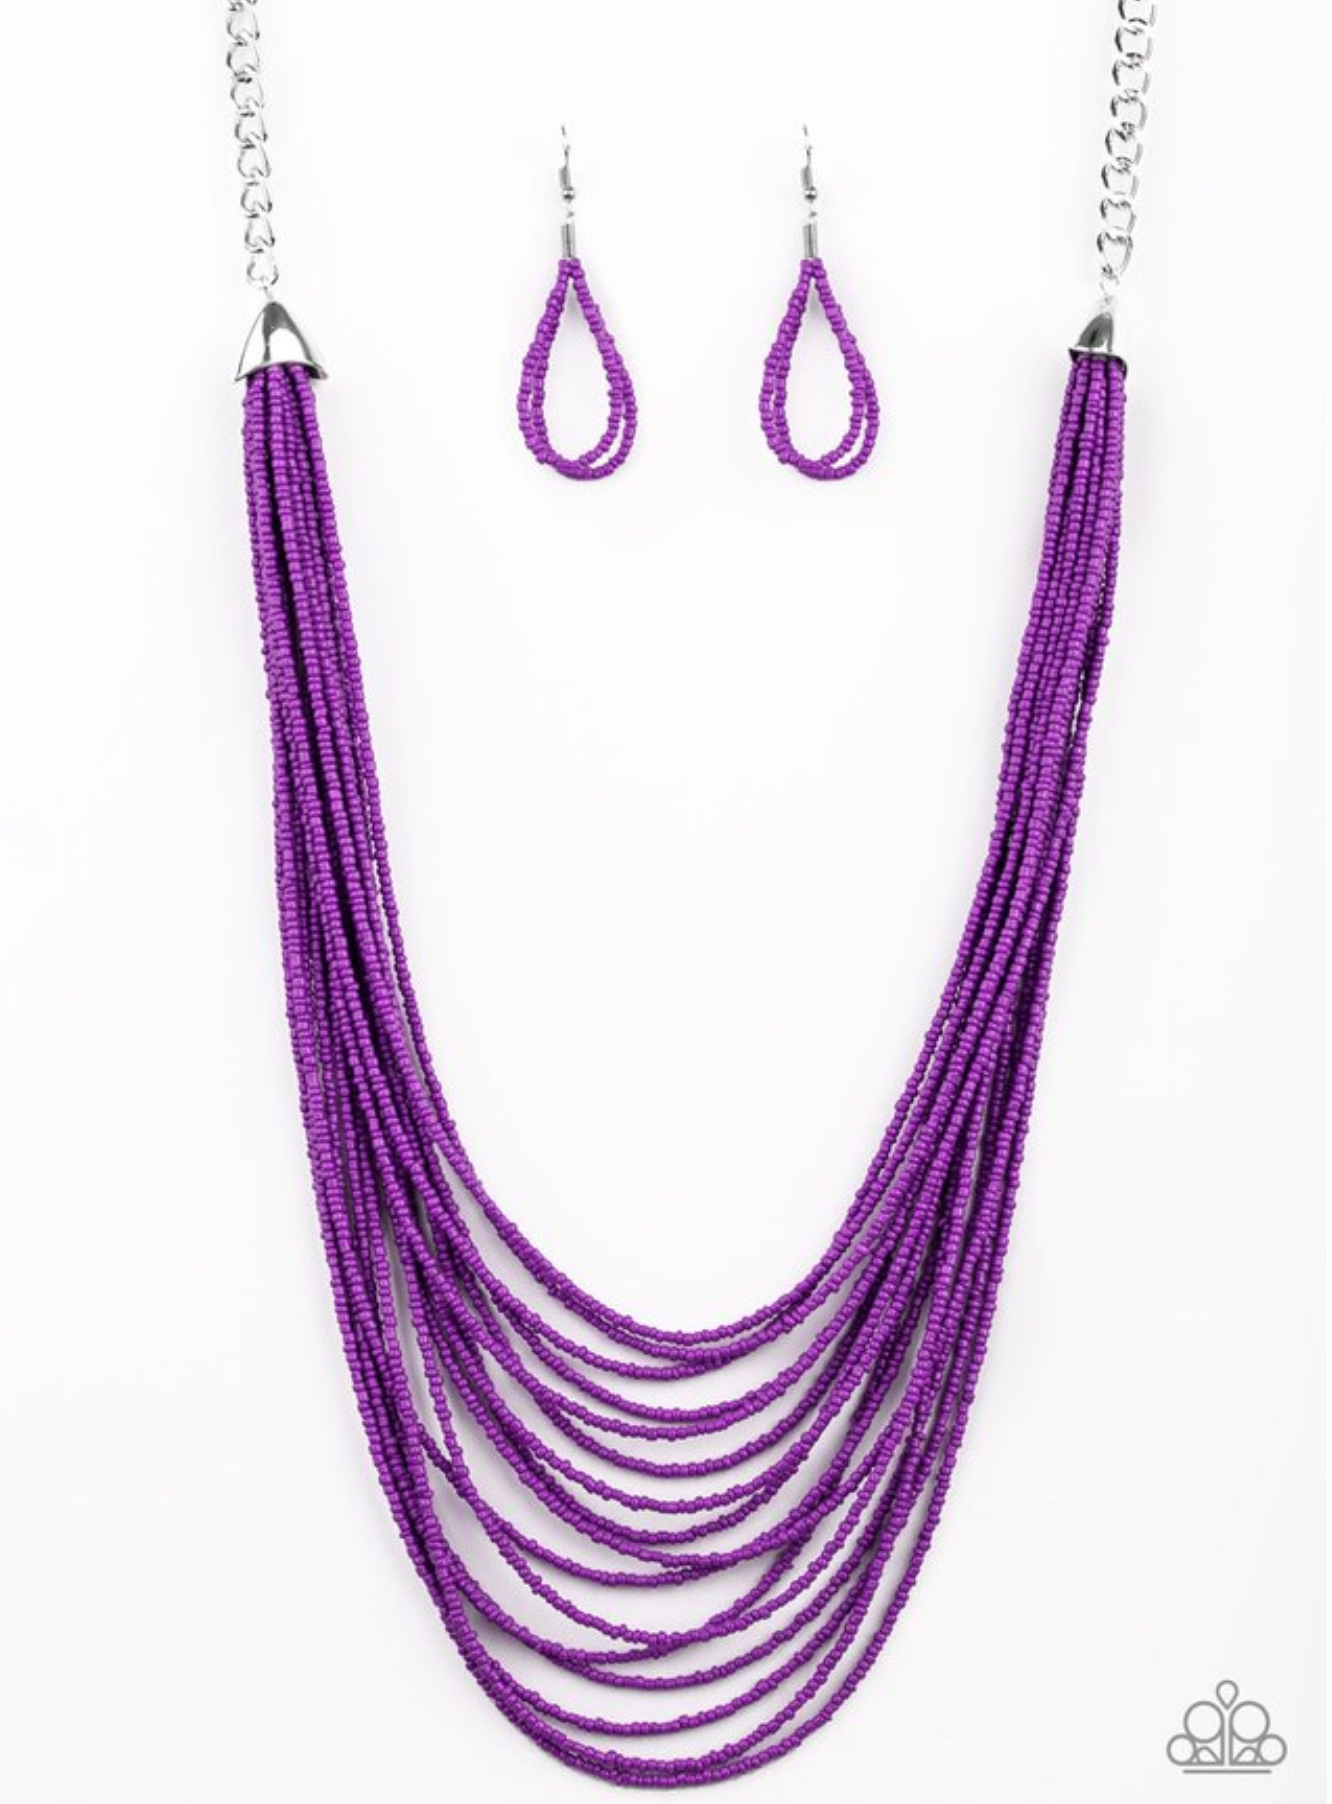 Peacefully Pacific purple - VJ Bedazzled Jewelry